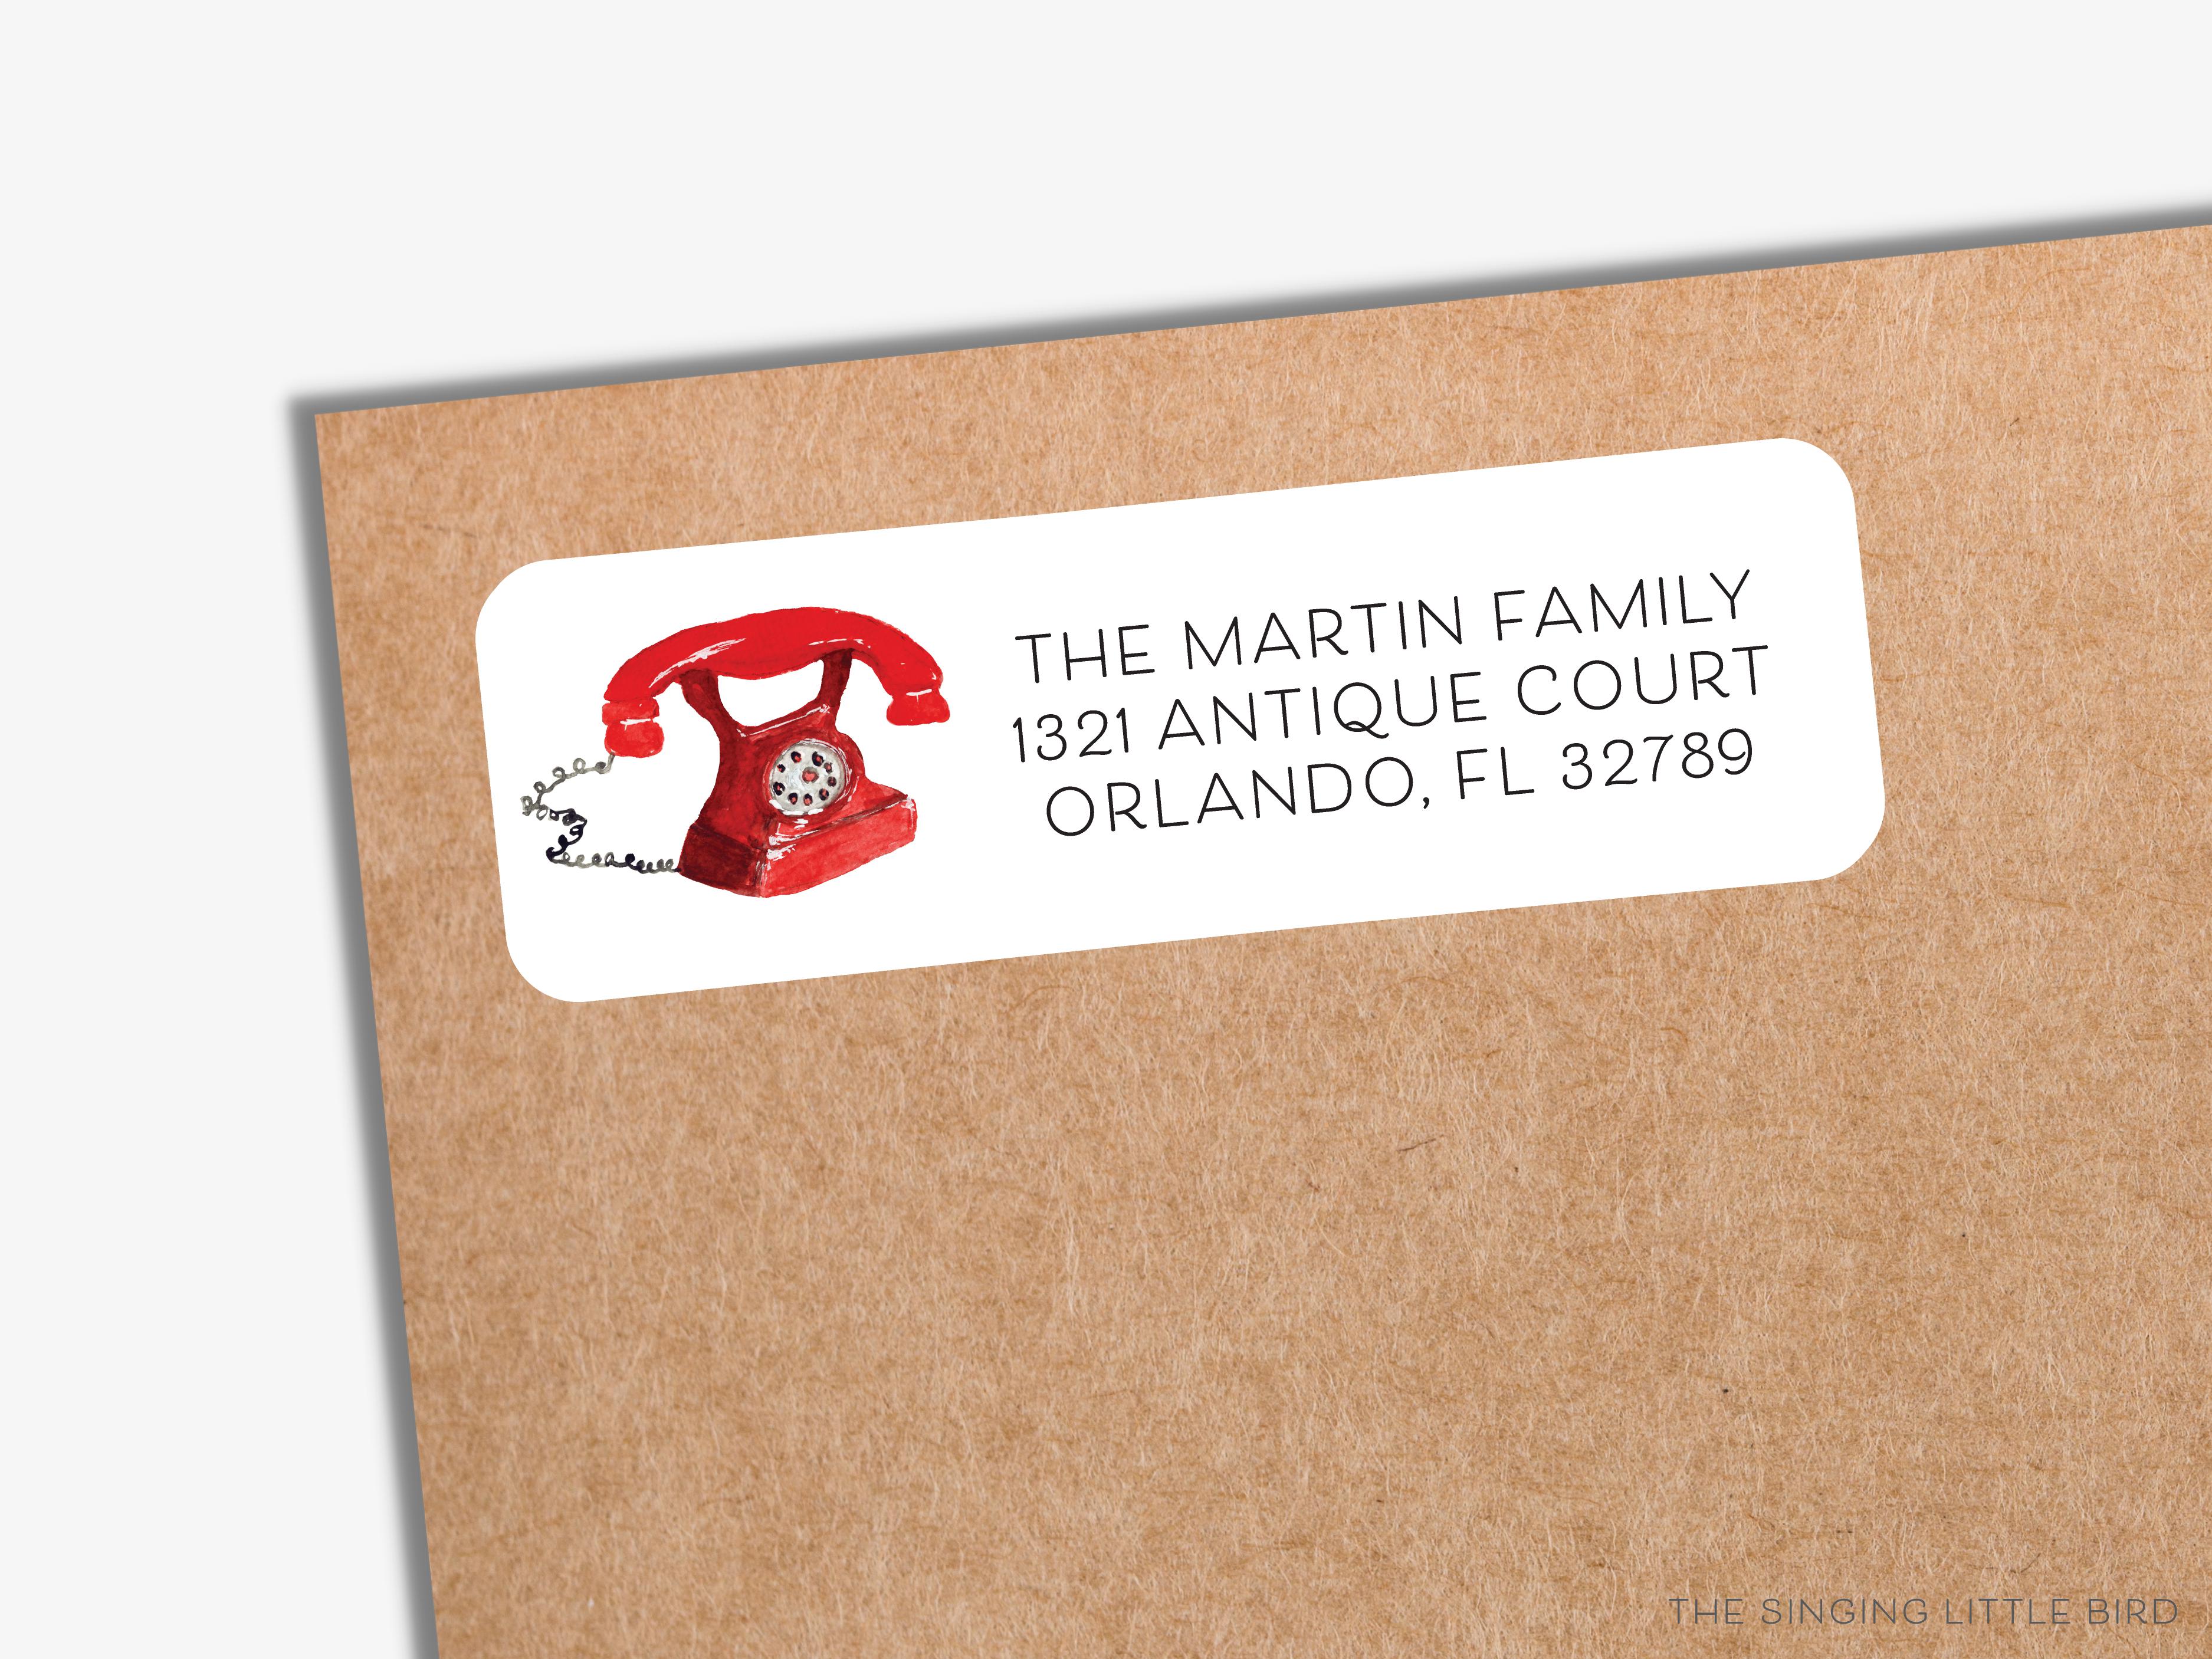 Vintage Phone Return Address Labels-These personalized return address labels are 2.625" x 1" and feature our hand-painted watercolor vintage telephone, printed in the USA on beautiful matte finish labels. These make great gifts for yourself or the vintage lover.-The Singing Little Bird